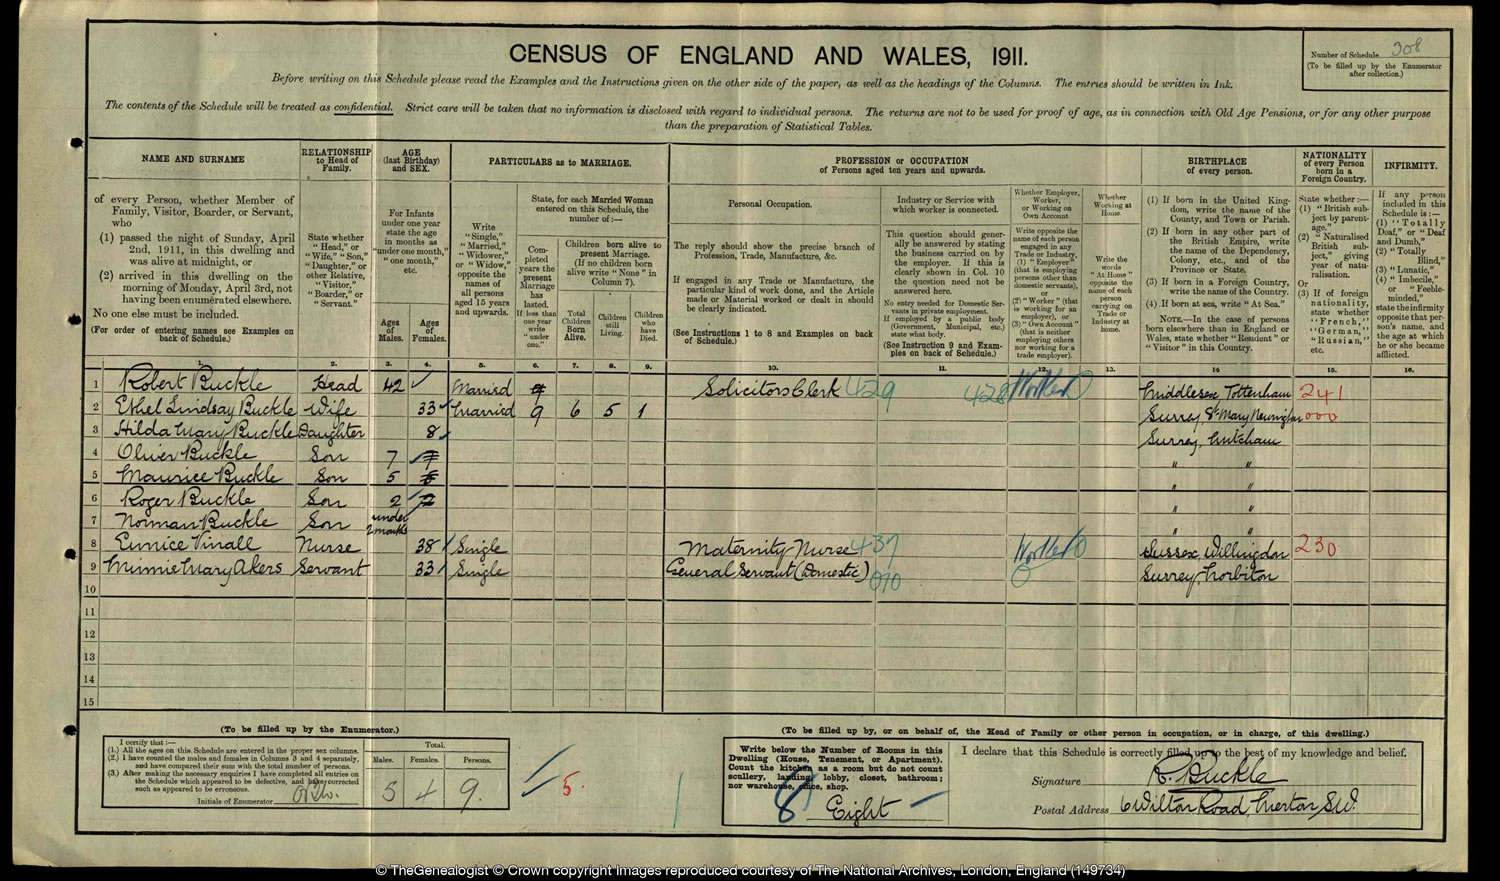 1911 census find Bobby Buckle and family at 6 Wilton Road